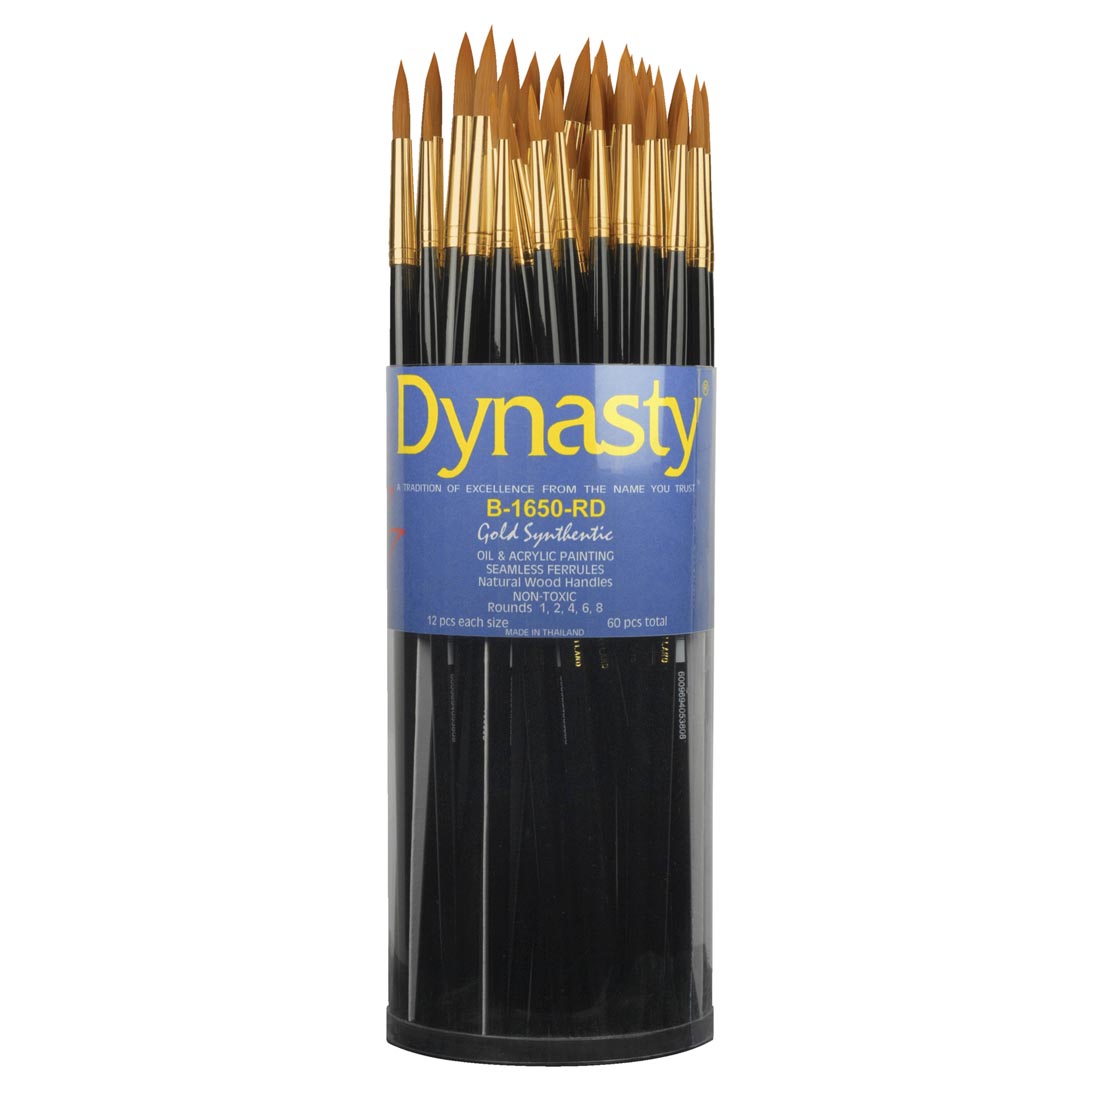 Dynasty Gold Synthetic Round Brush Assortment in a Tub